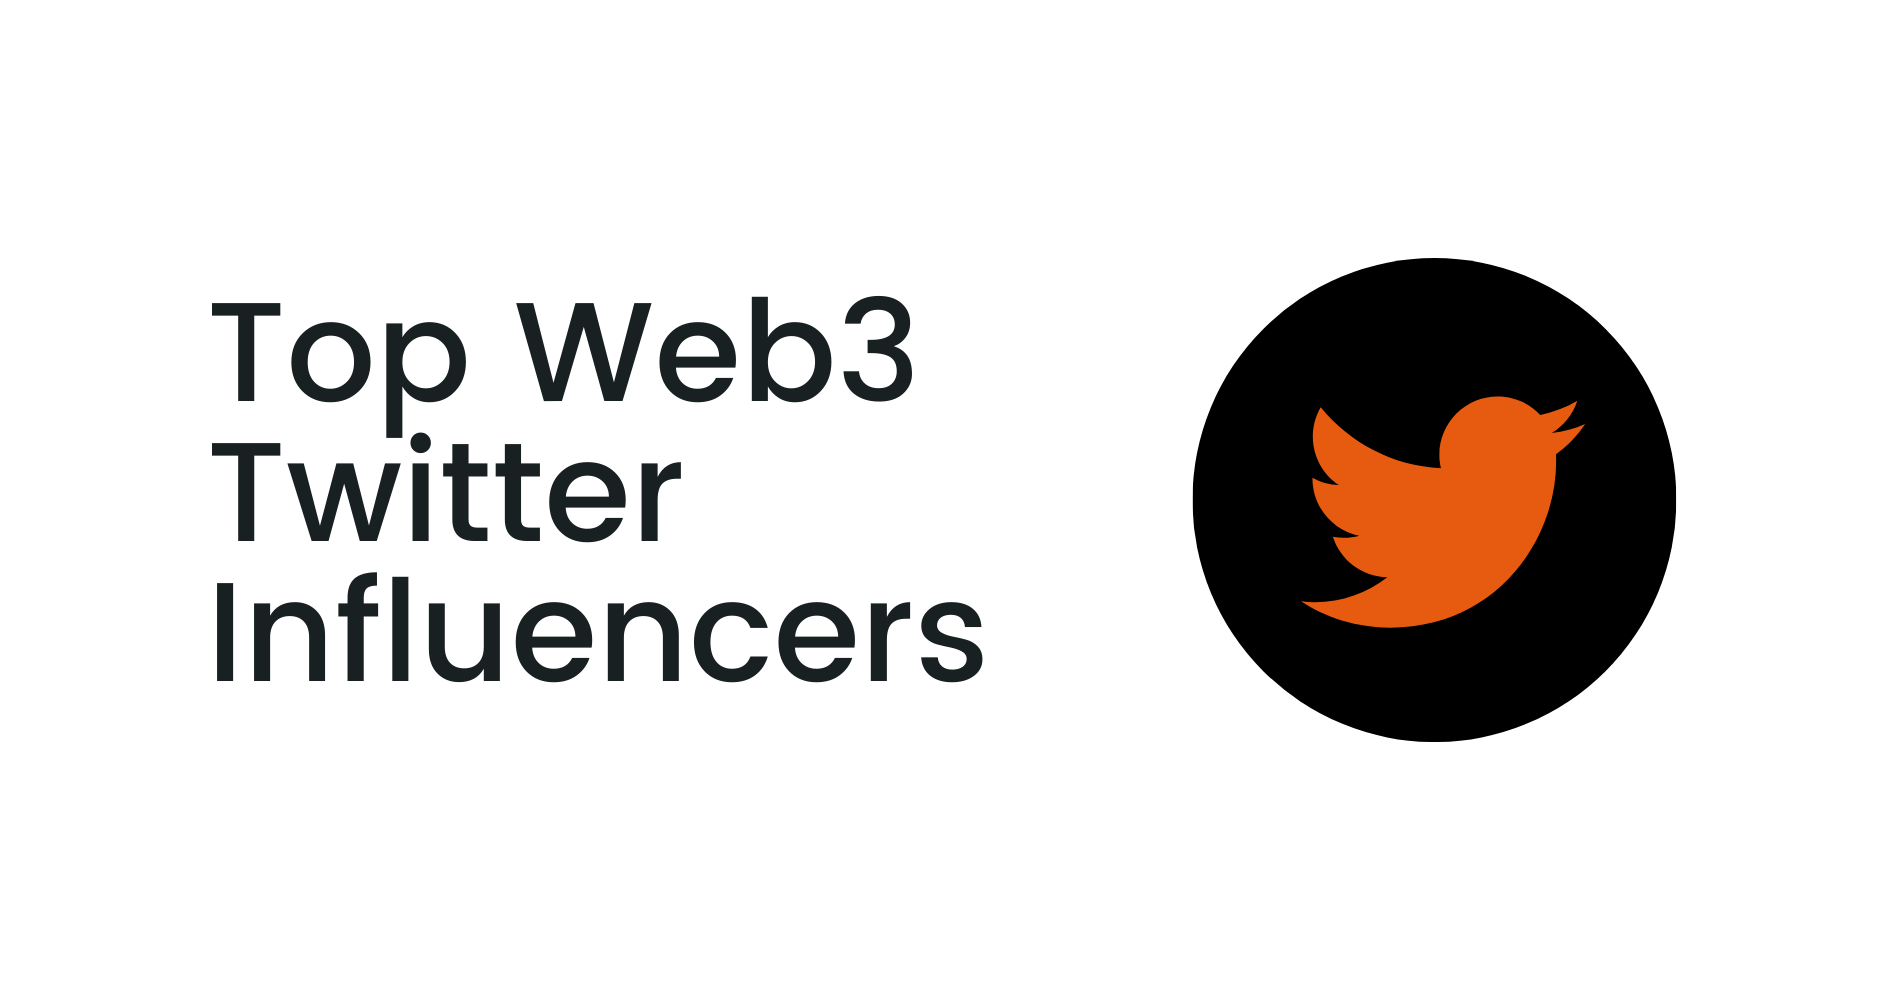 Top Web3 Twitter Influencers